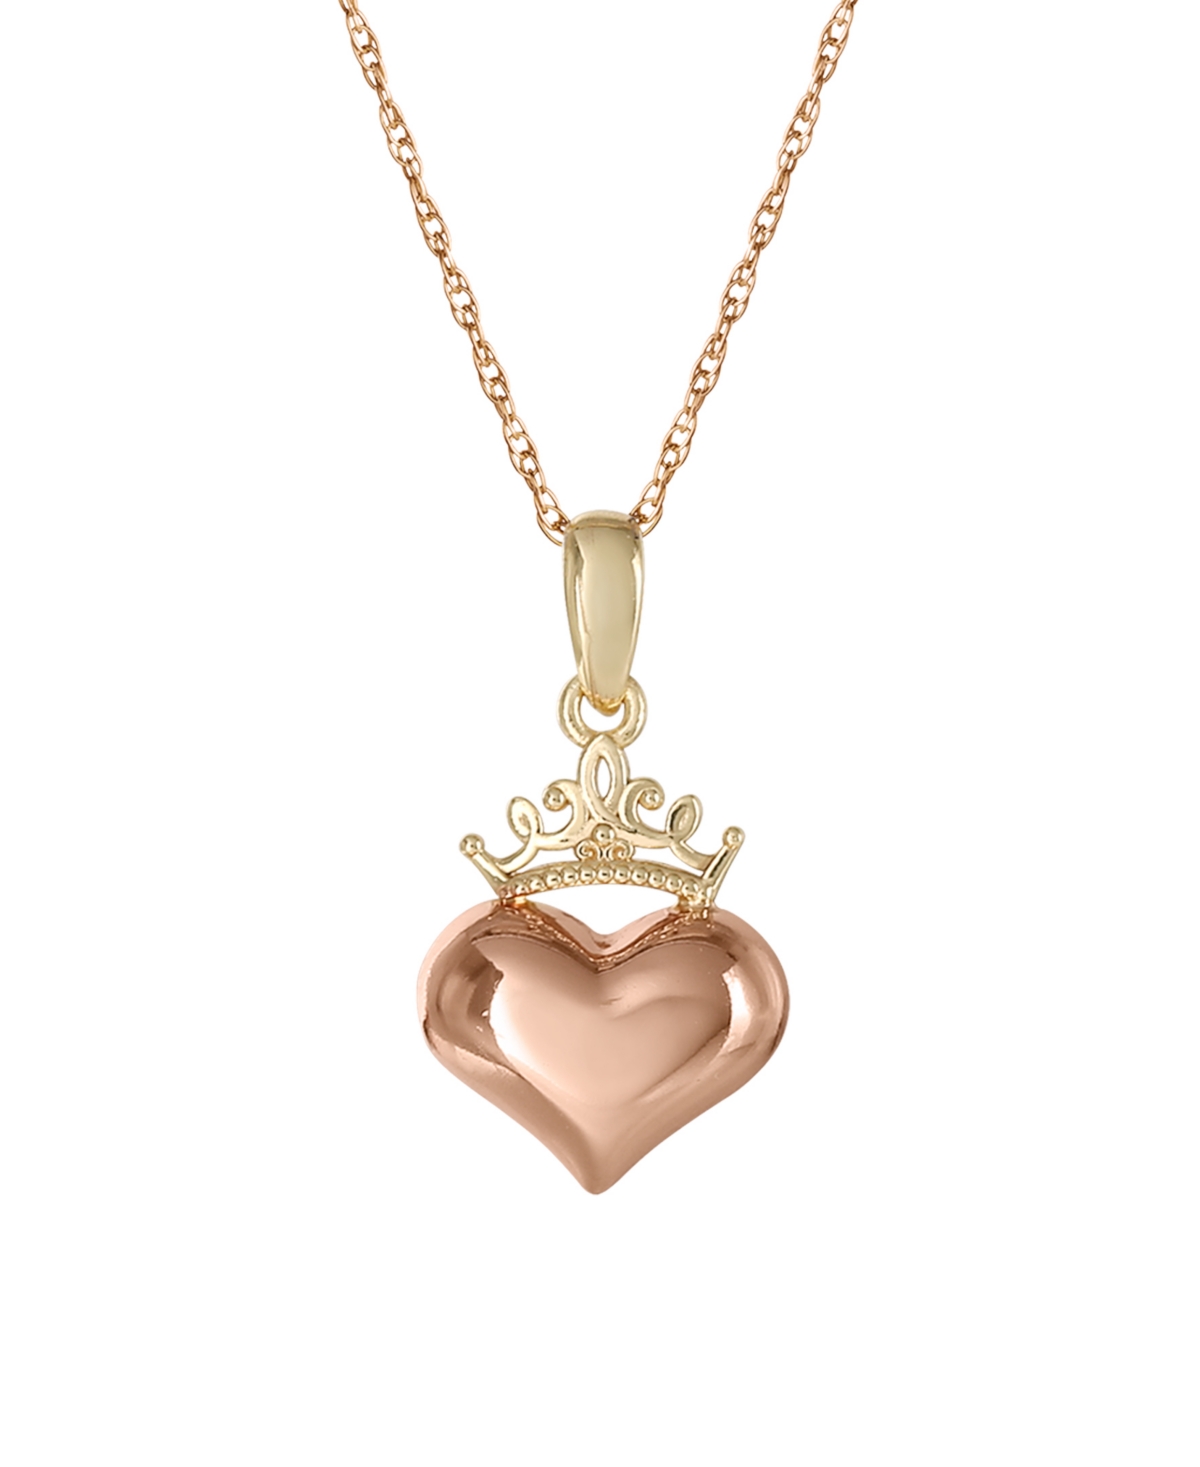 Children's Princess Heart & Crown 15" Pendant Necklace in 14k Yellow and Rose Gold - Gold